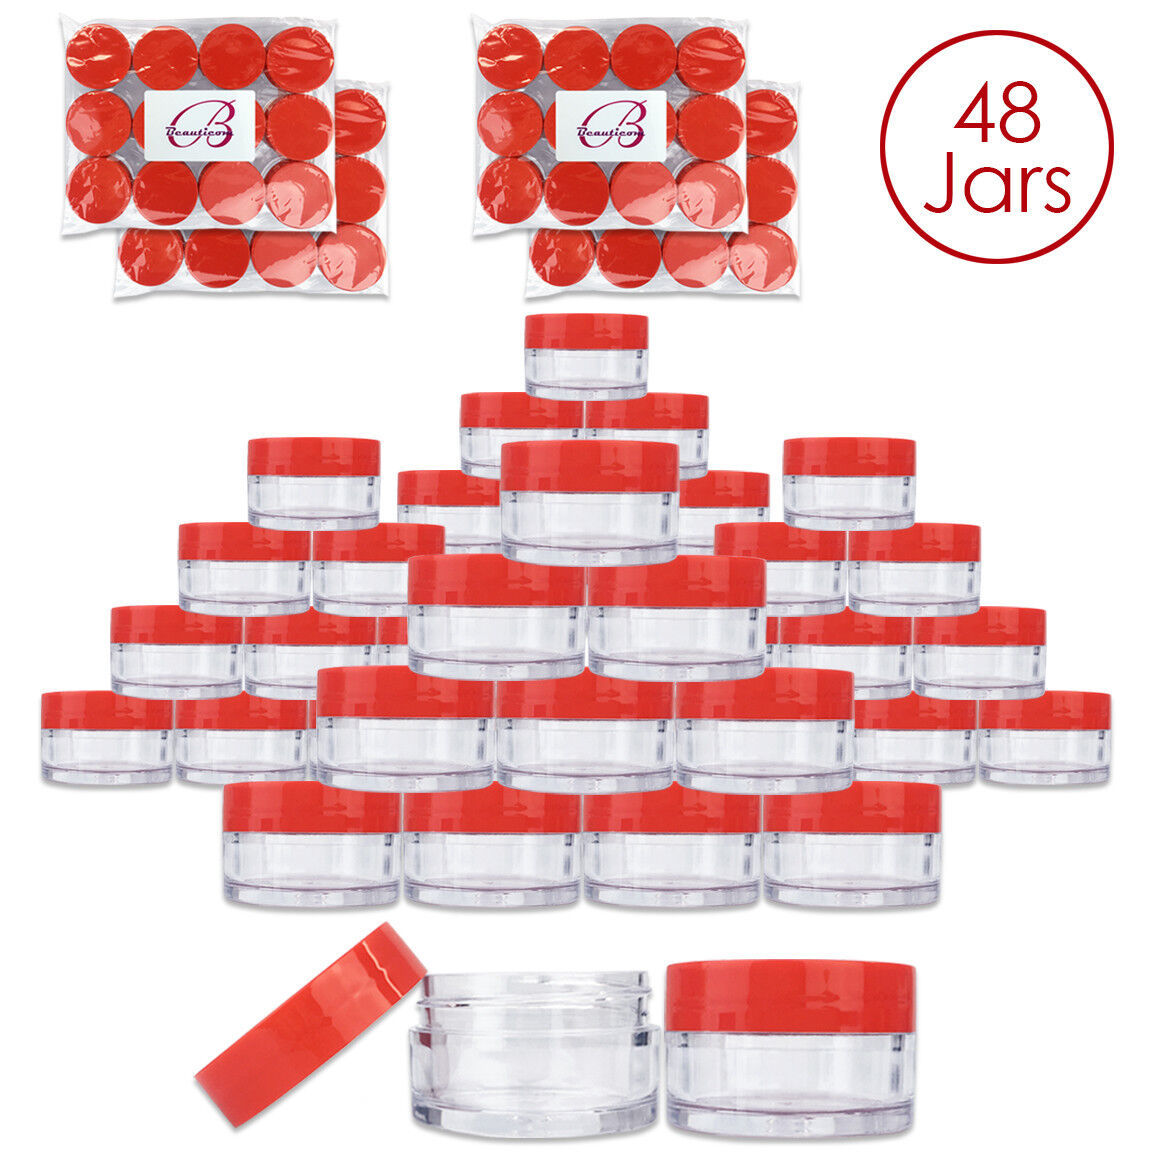 Uxcell 10oz/ 300ml Round Plastic Jars with White Screw Top Lid for Storage 10Pack